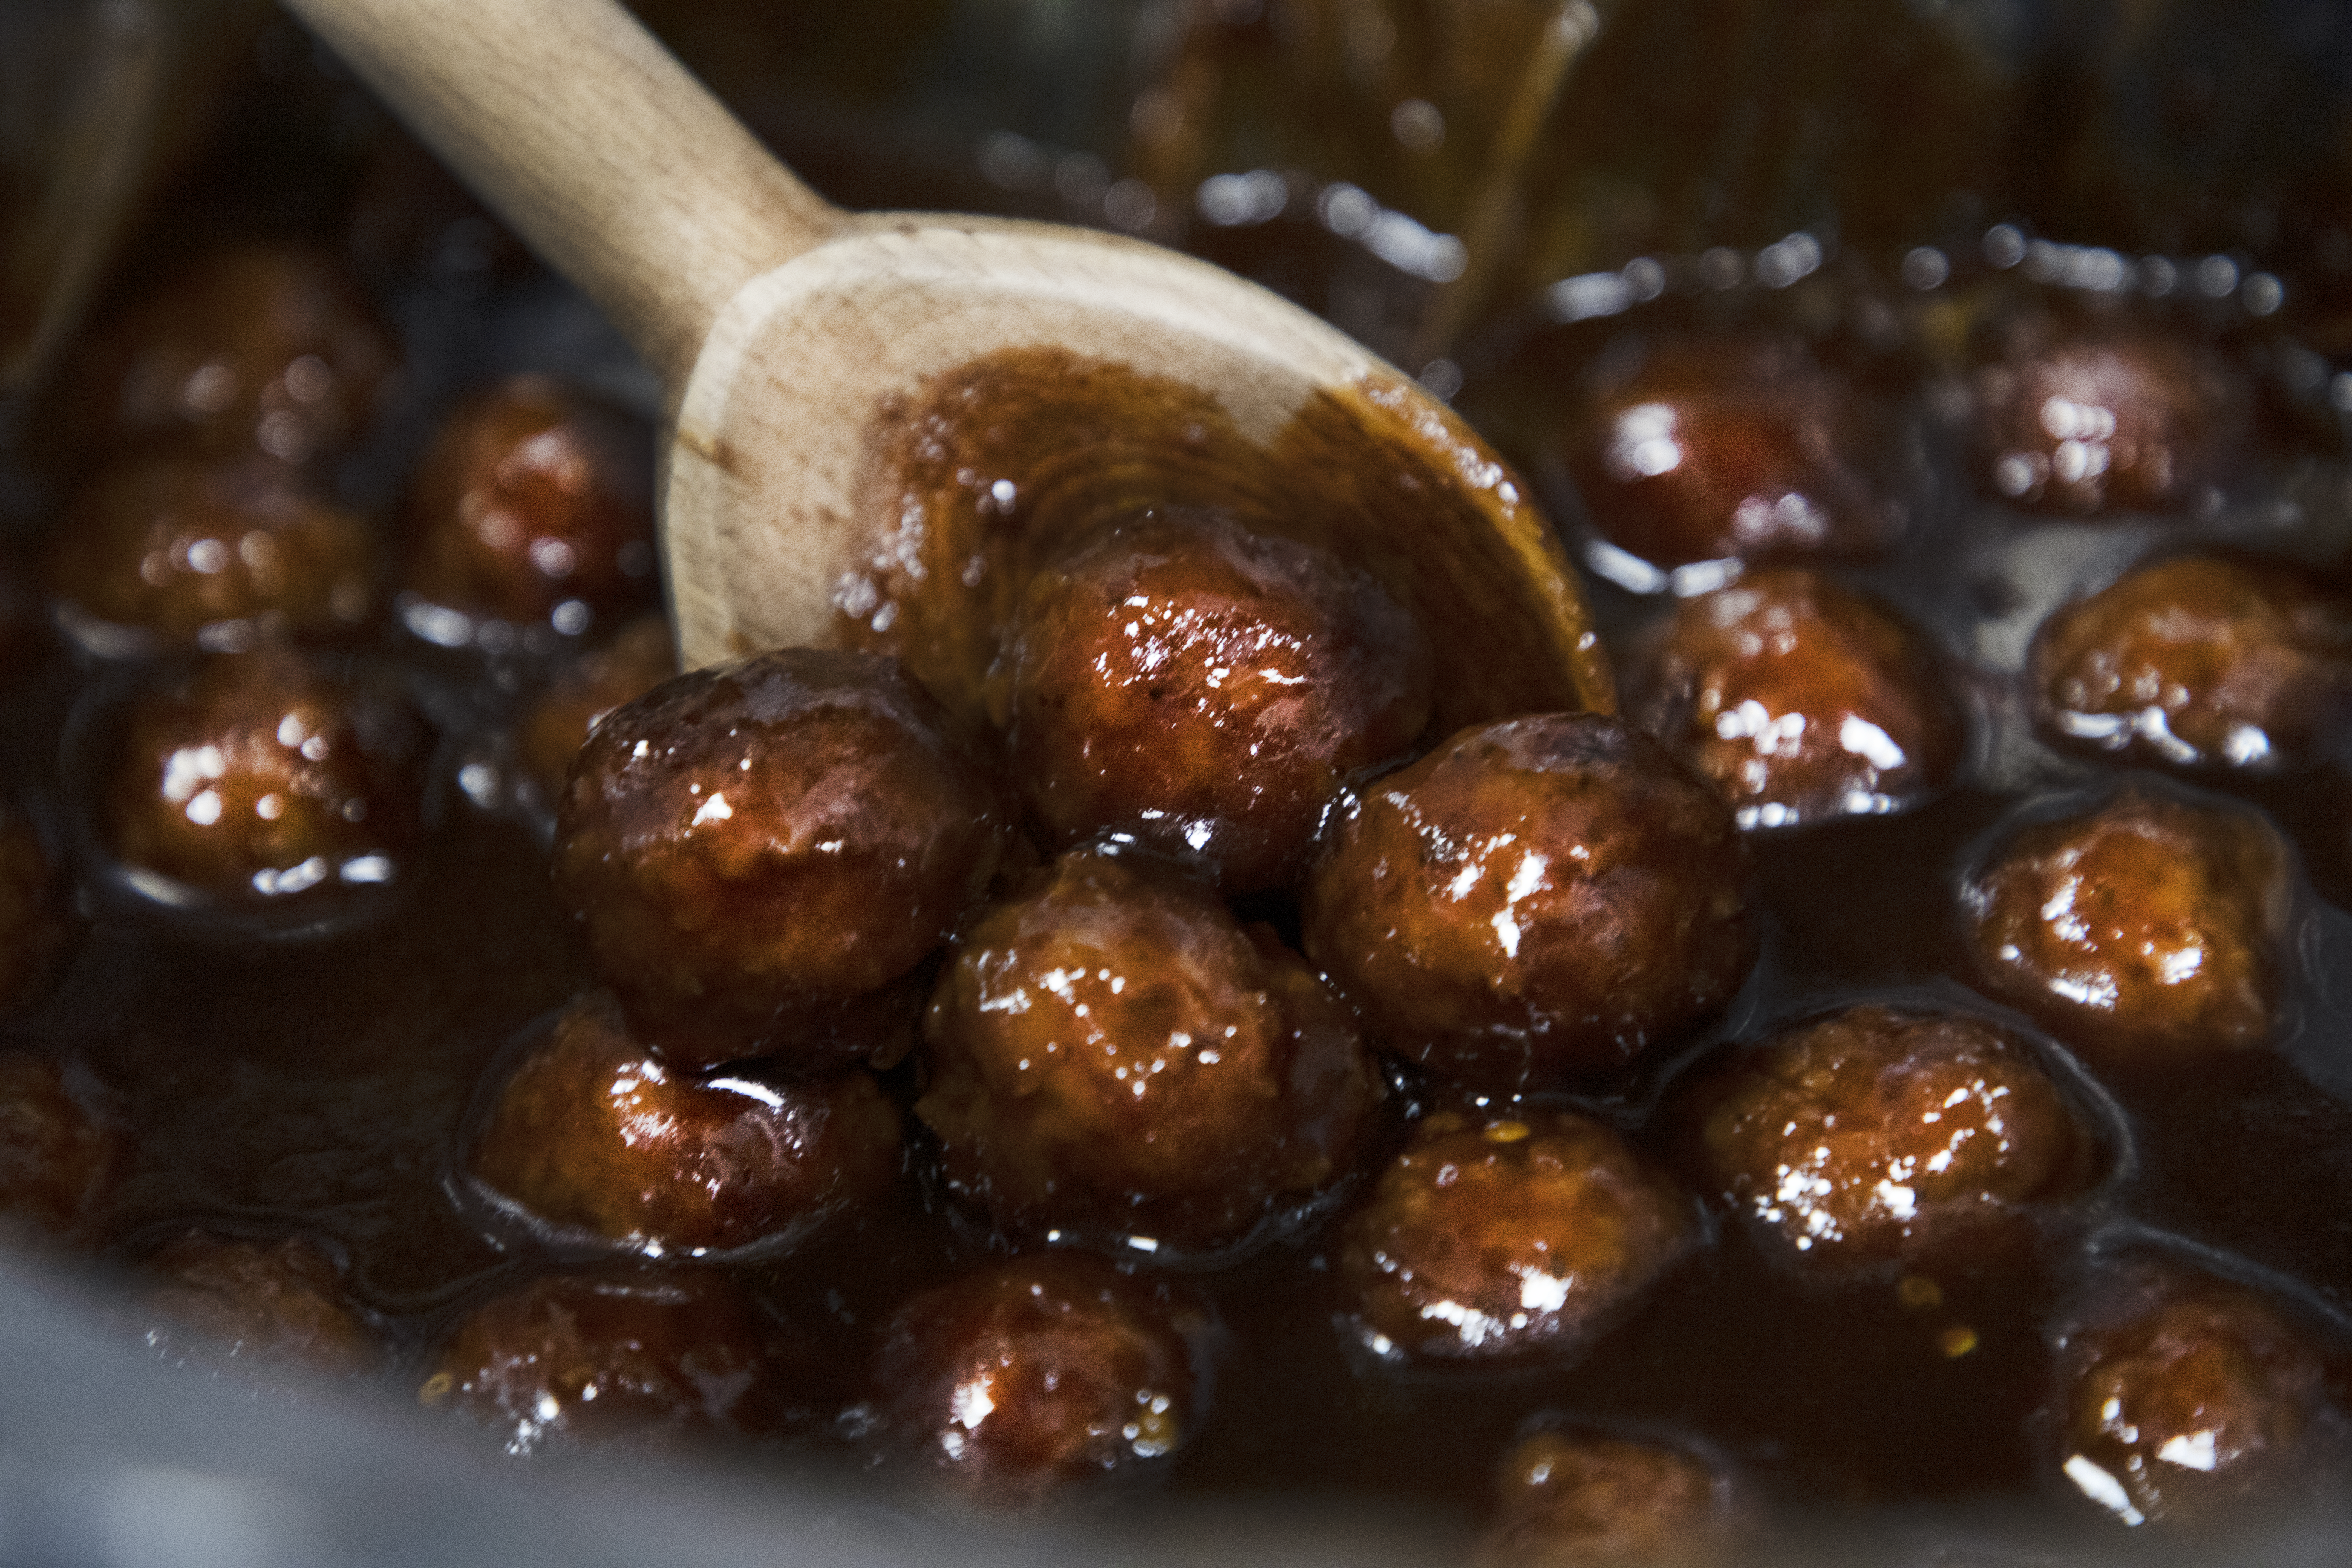 meatballs covered in barbeque sauce being stirred with a wooden spoon